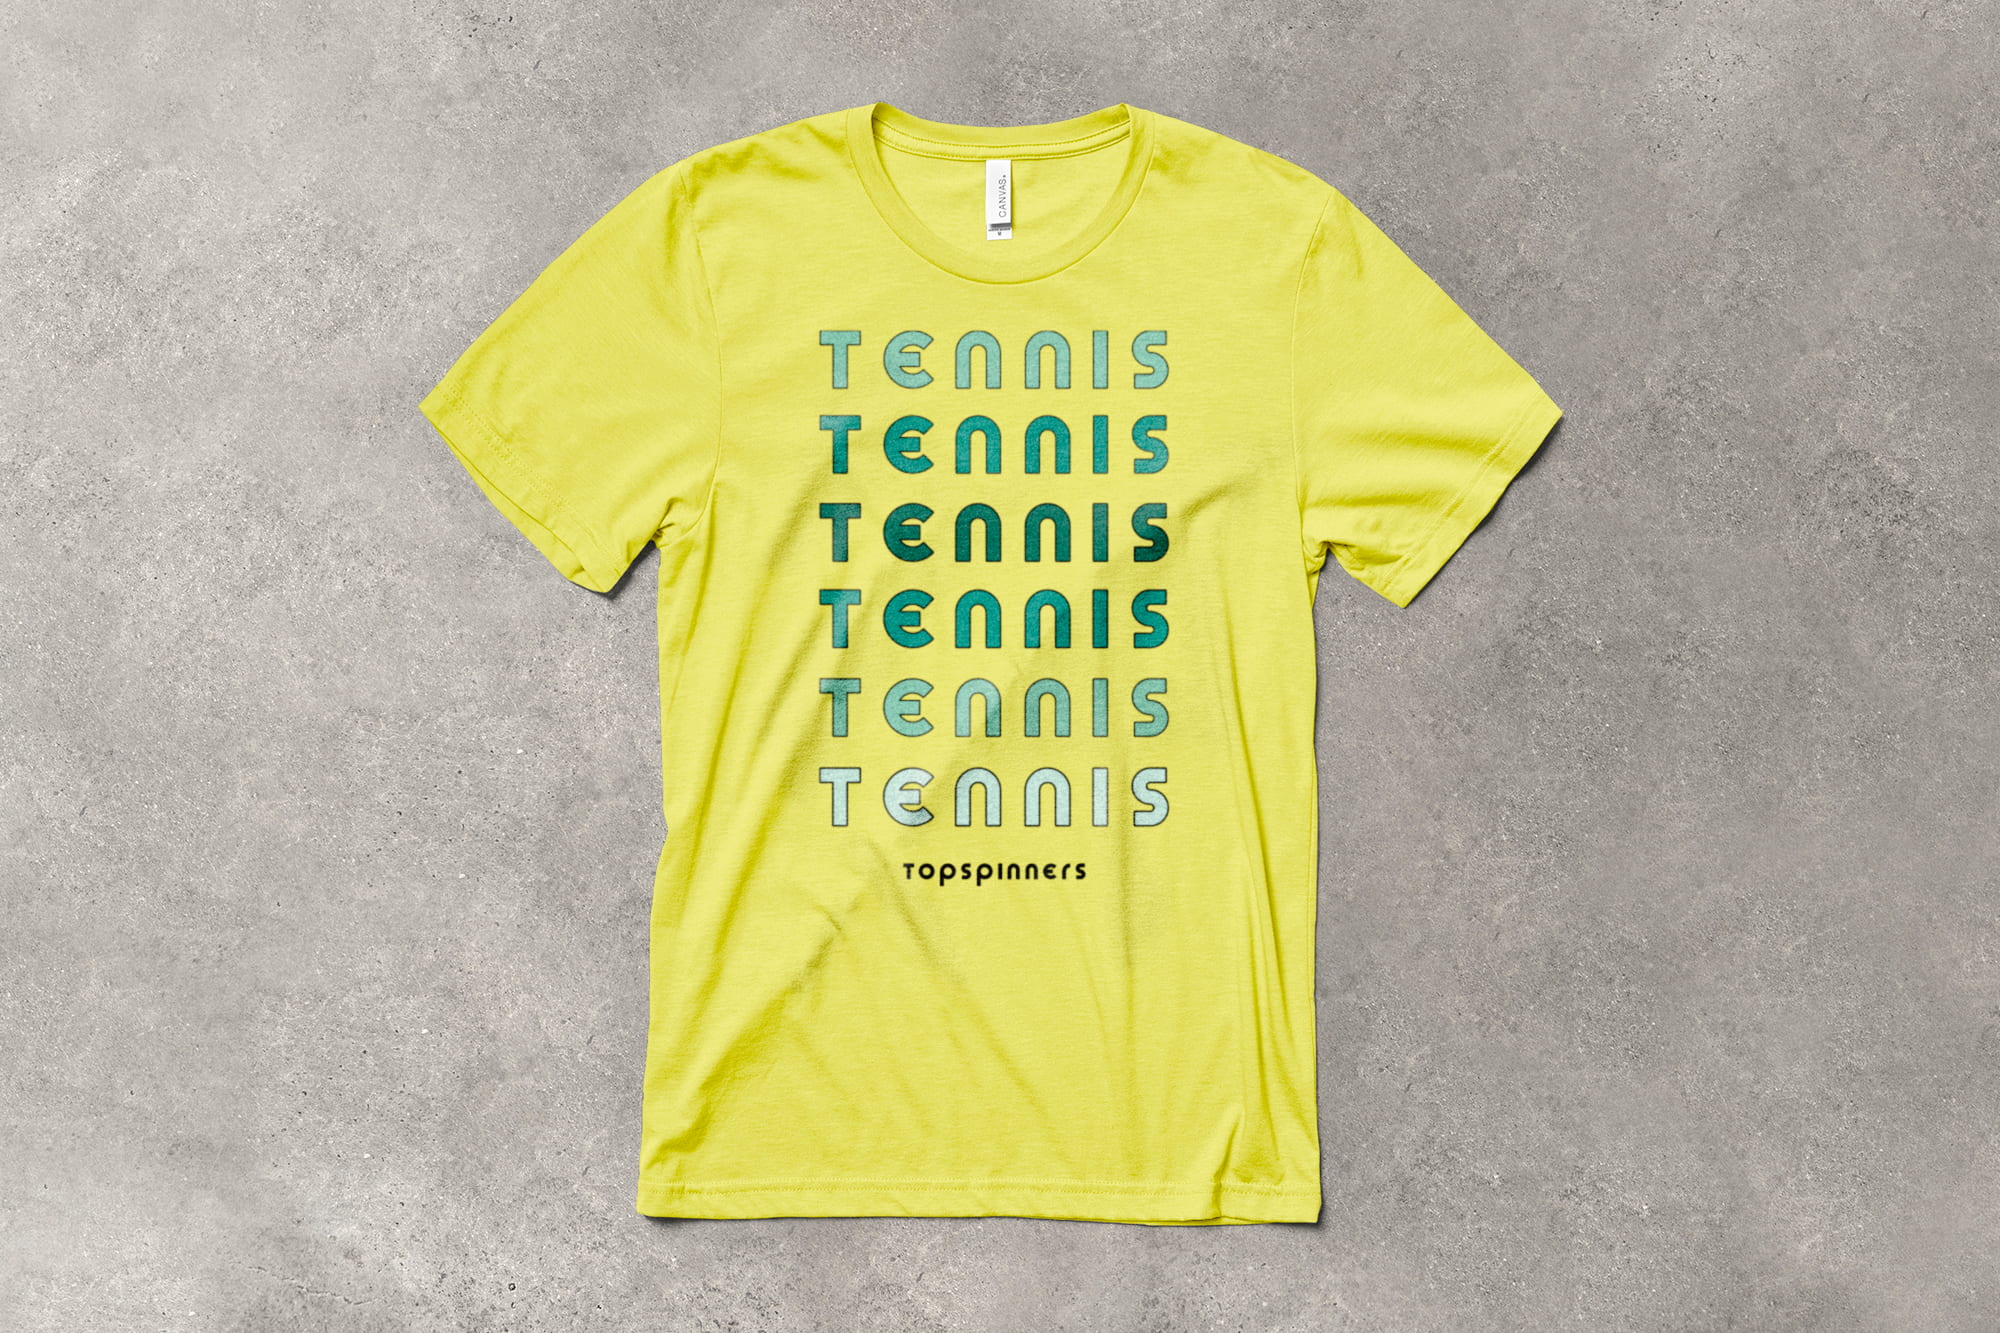 flatlay of a brightly colored t-shirt with a bold design that has the word "Tennis" repeating vertically